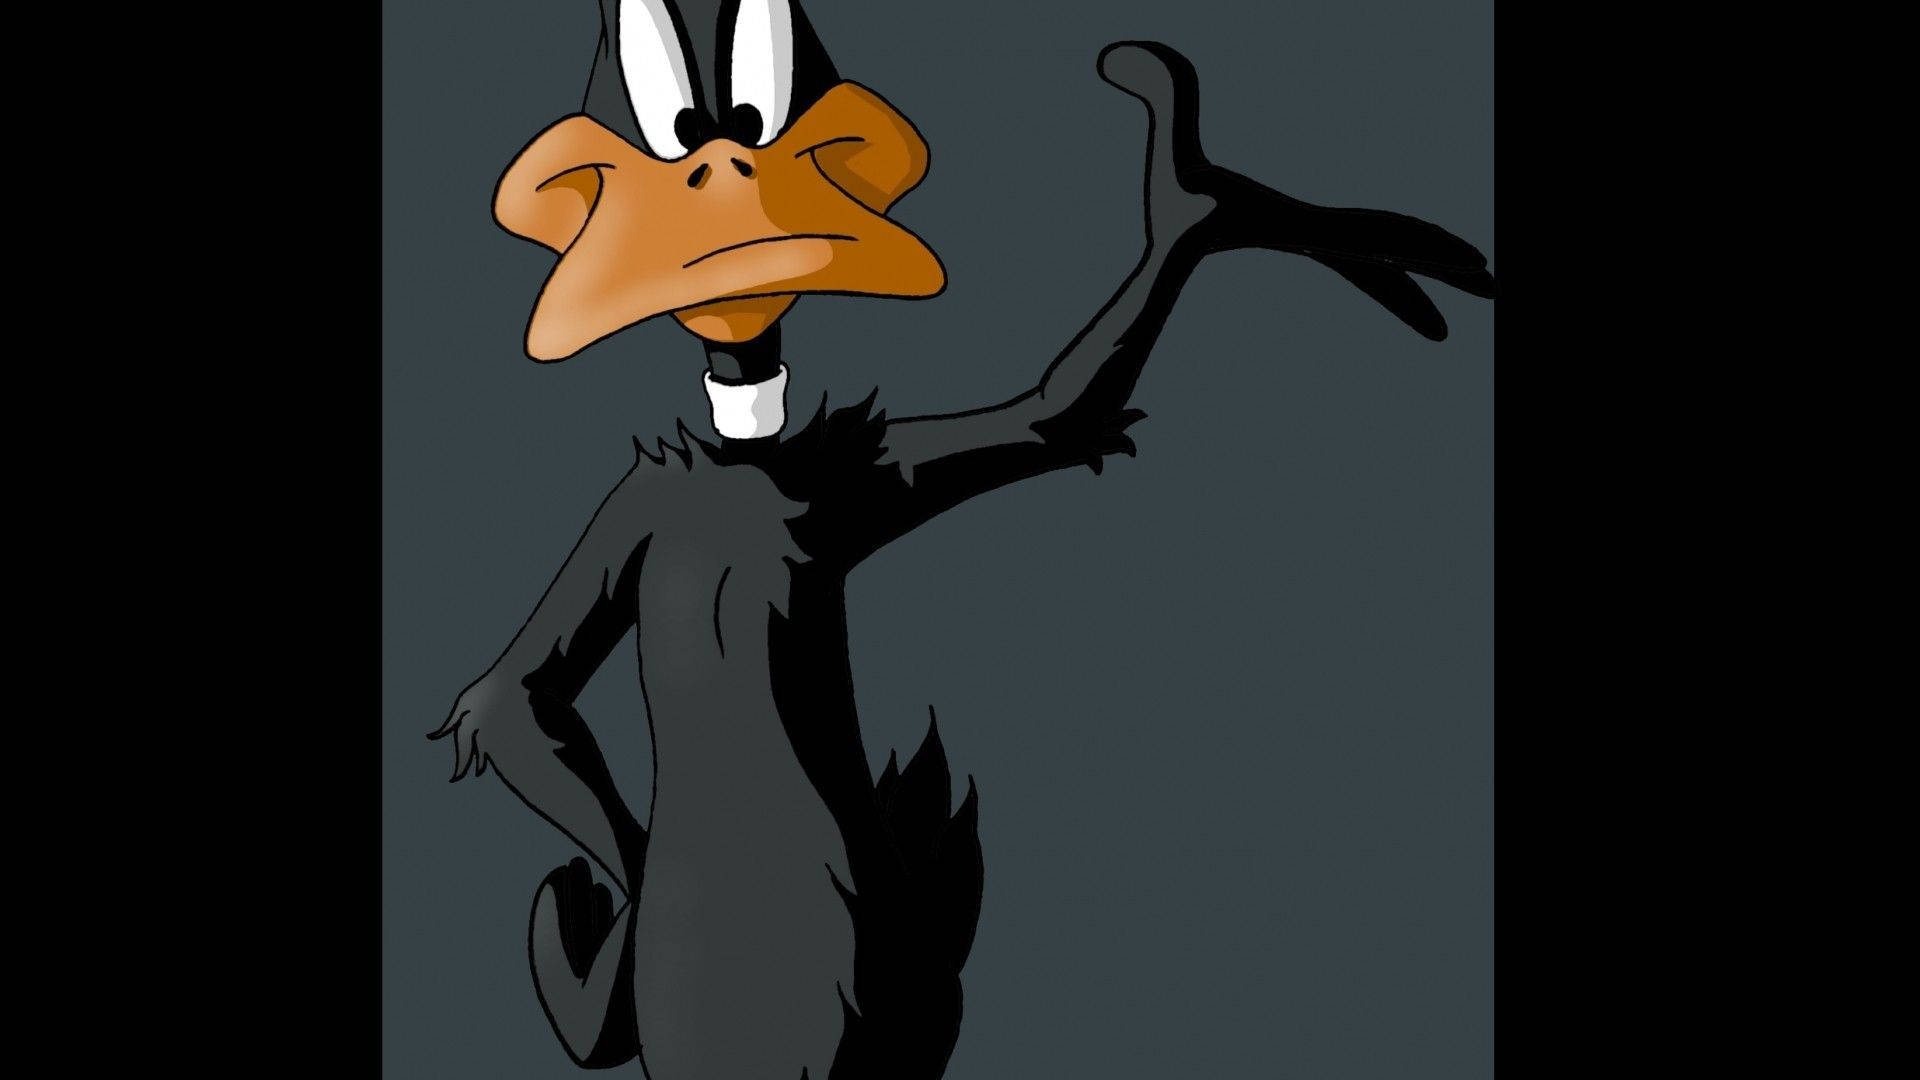 Free Daffy Duck Wallpaper Downloads, [100+] Daffy Duck Wallpapers for FREE  